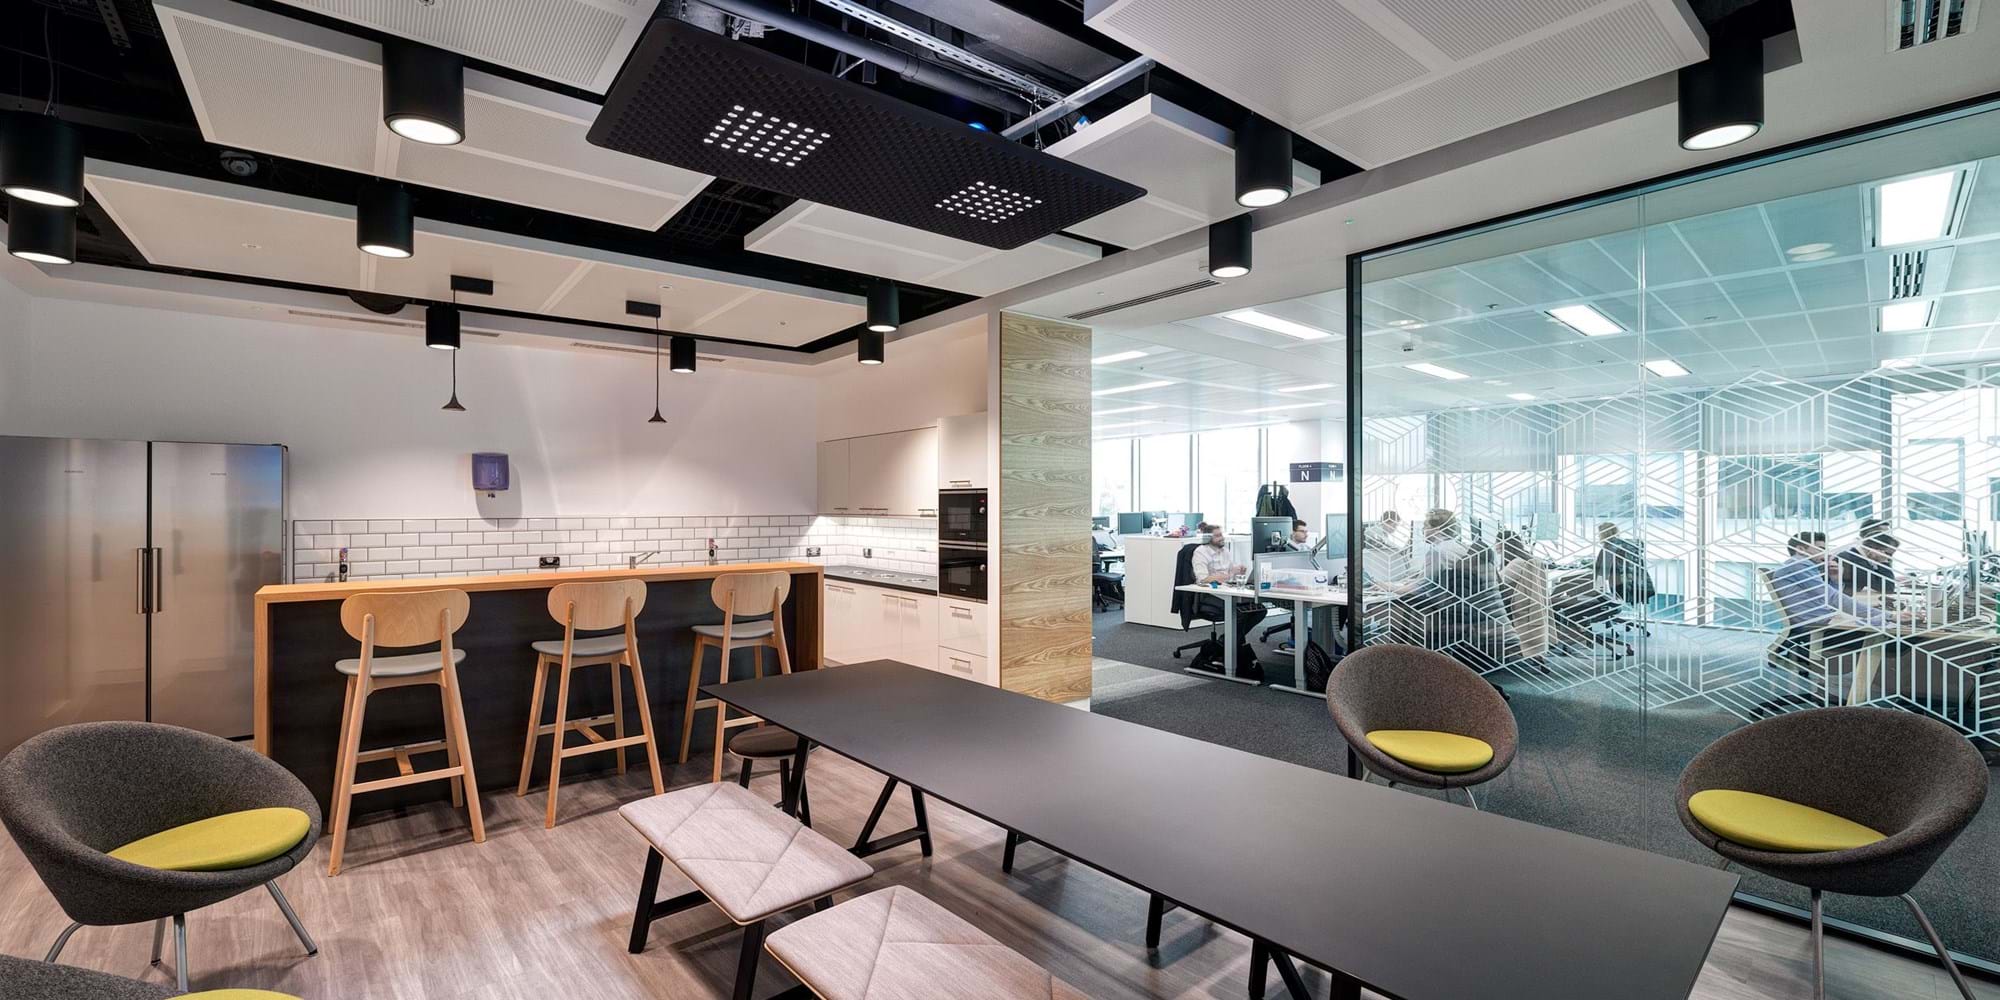 Modus Workspace office design, fit out and refurbishment - Atkins - Victoria, London - Atkins 08 highres sRGB.jpg